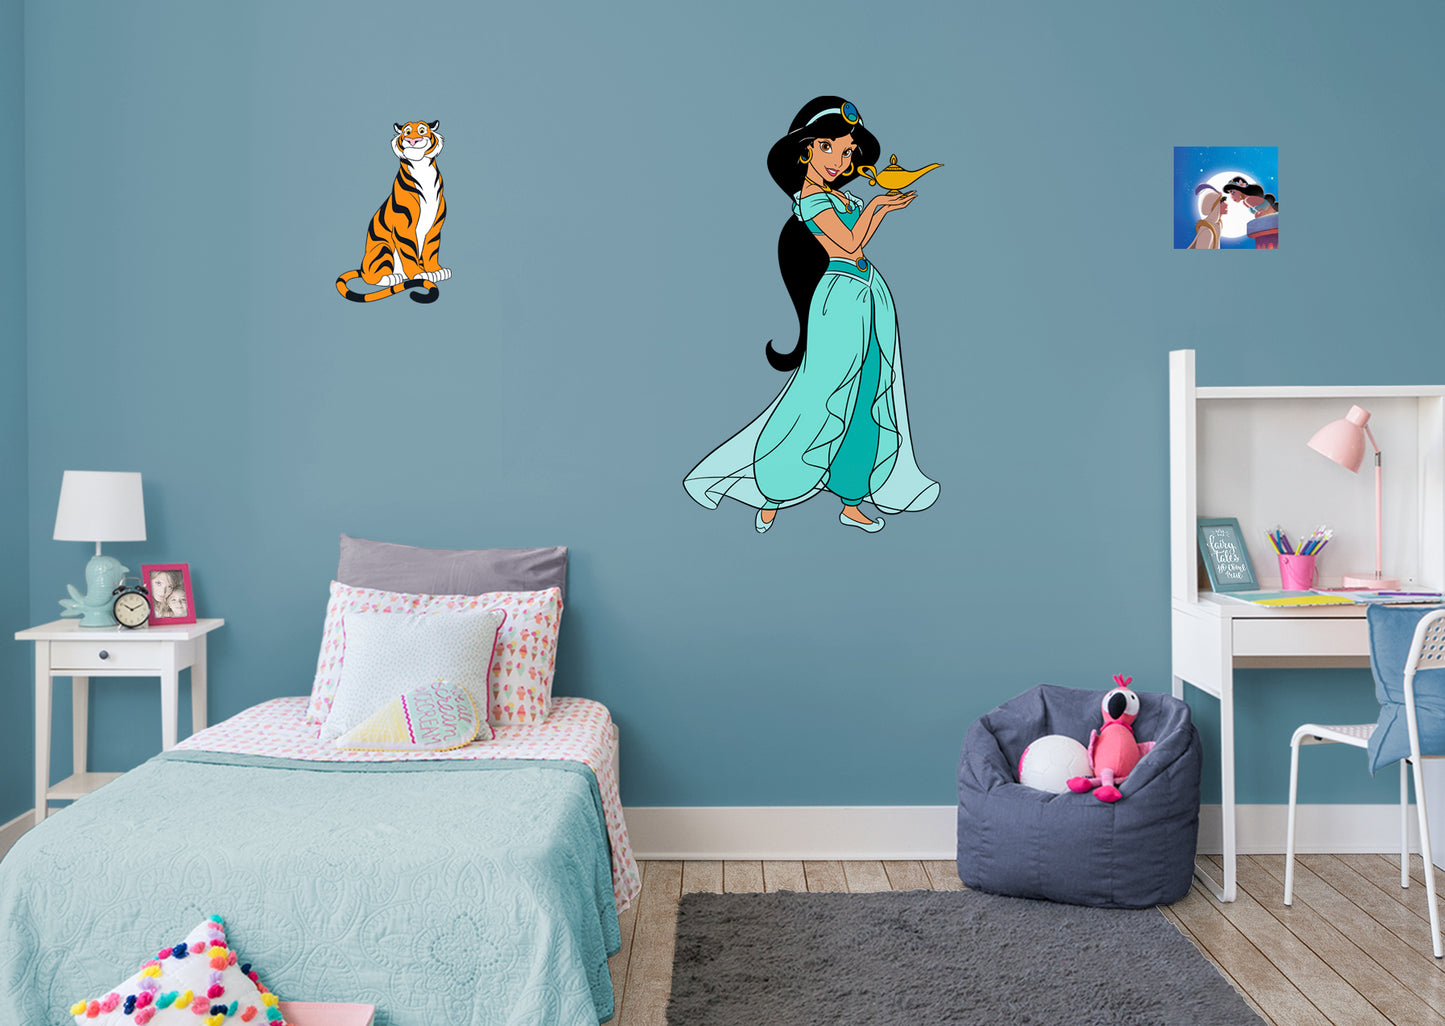 Aladdin: Jasmine RealBigs        - Officially Licensed Disney Removable Wall   Adhesive Decal